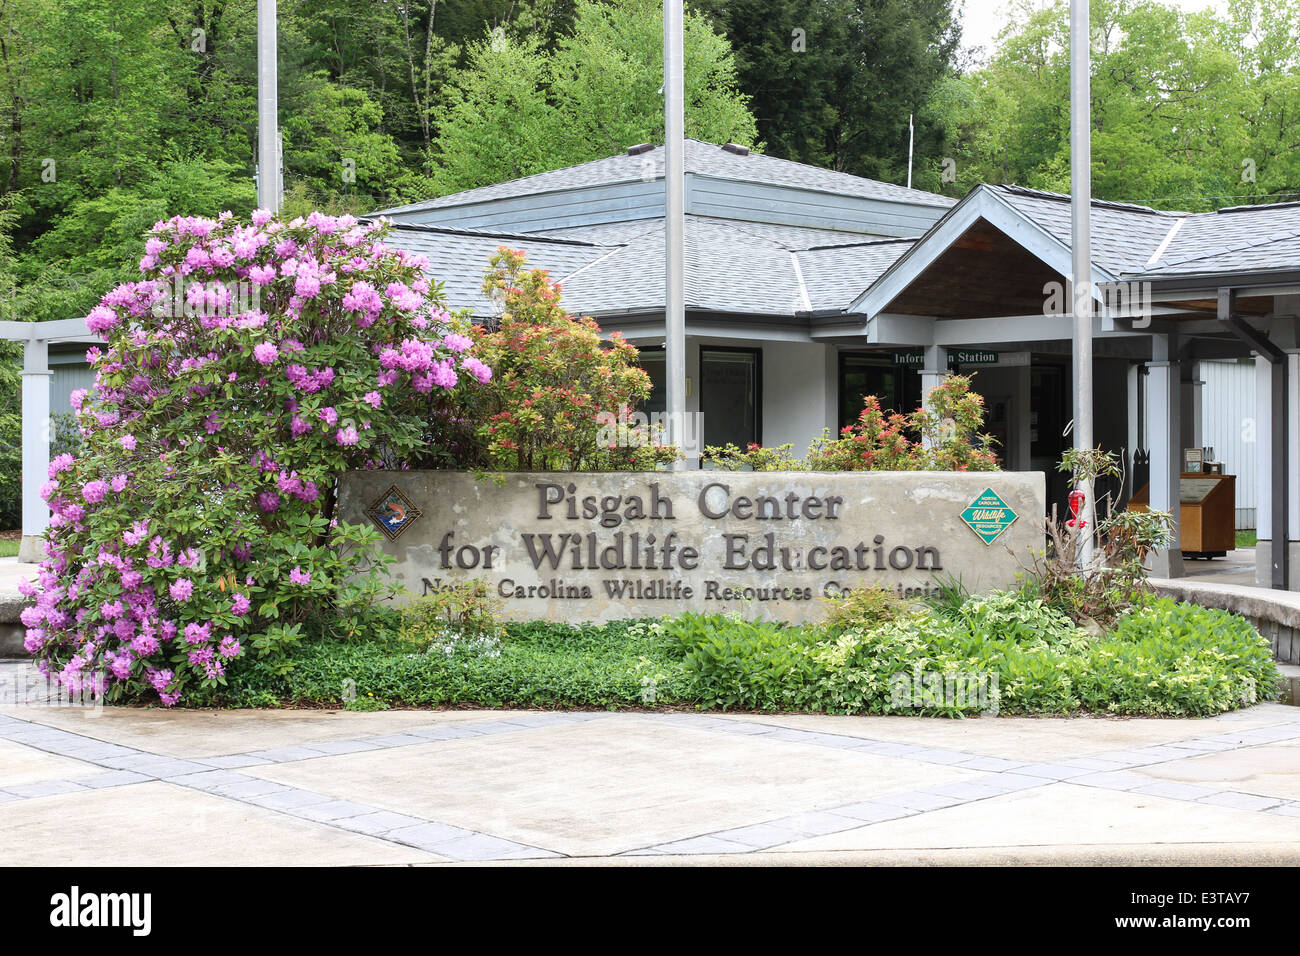 Pisgah Center for Wildlife Education in Pisgah National Forest near Brevard, North Carolina is the home of a fish farm, Stock Photo